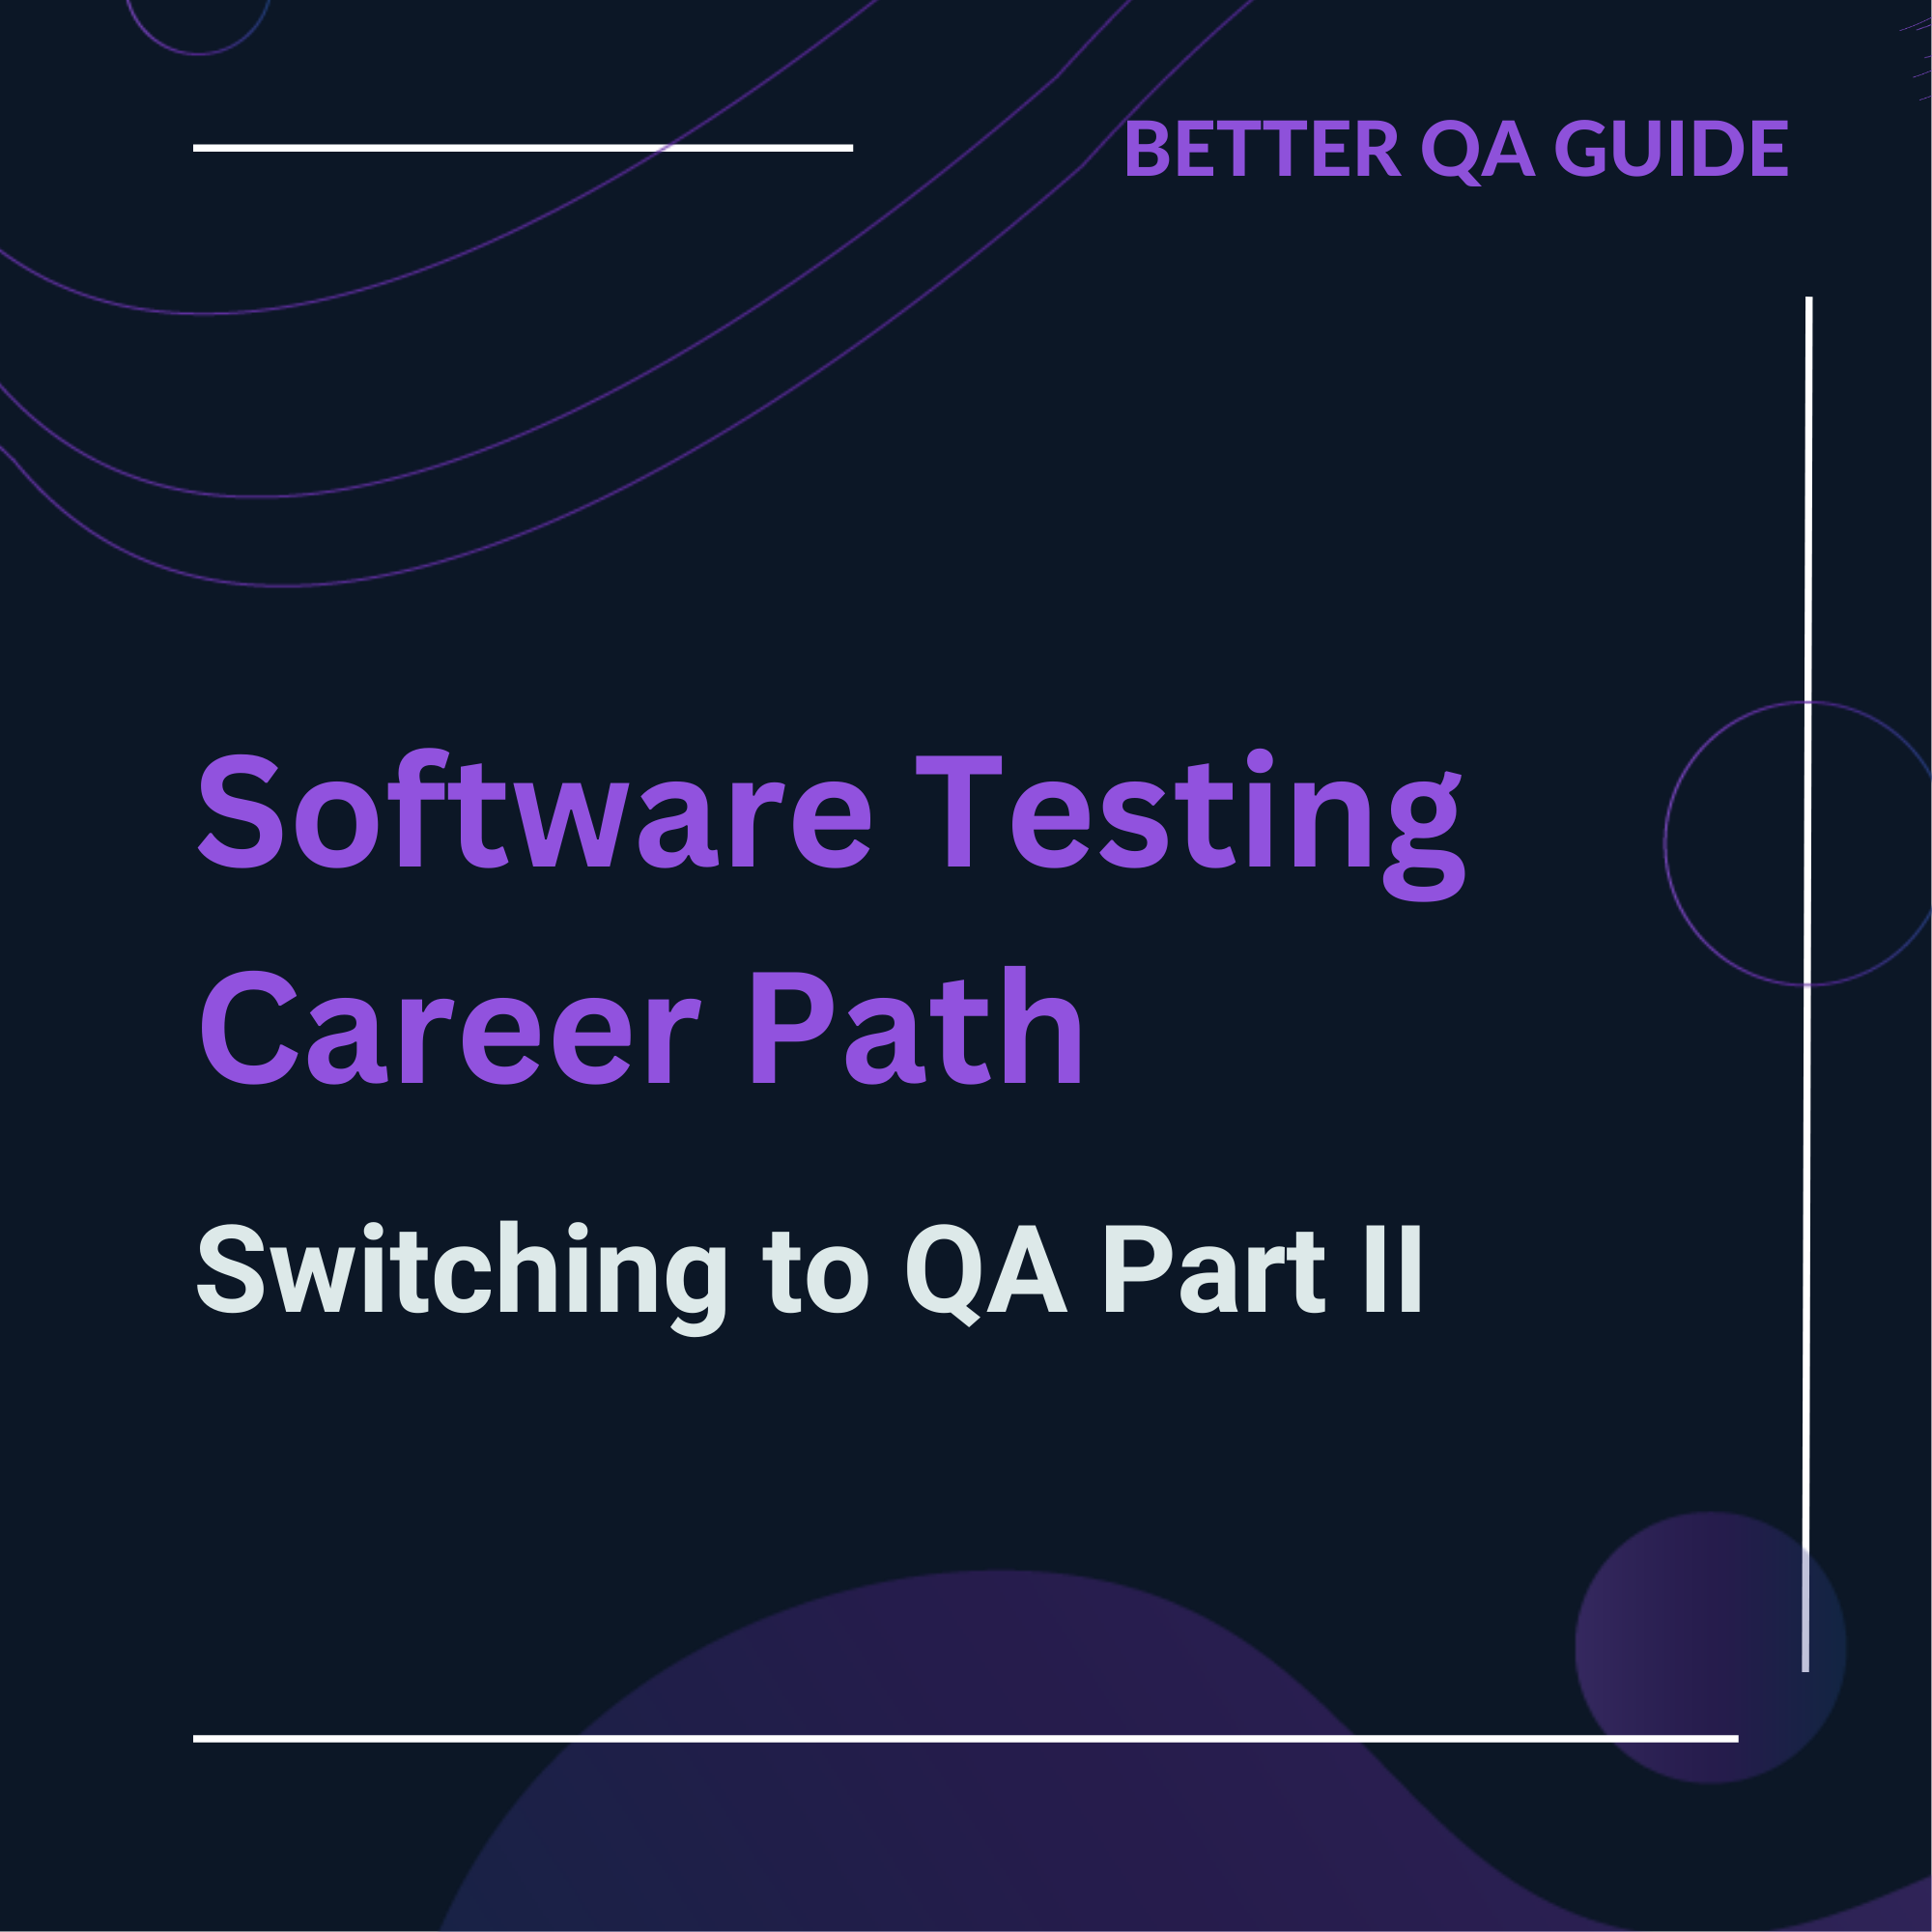 Software Testing Career Path Switching to QA Part II